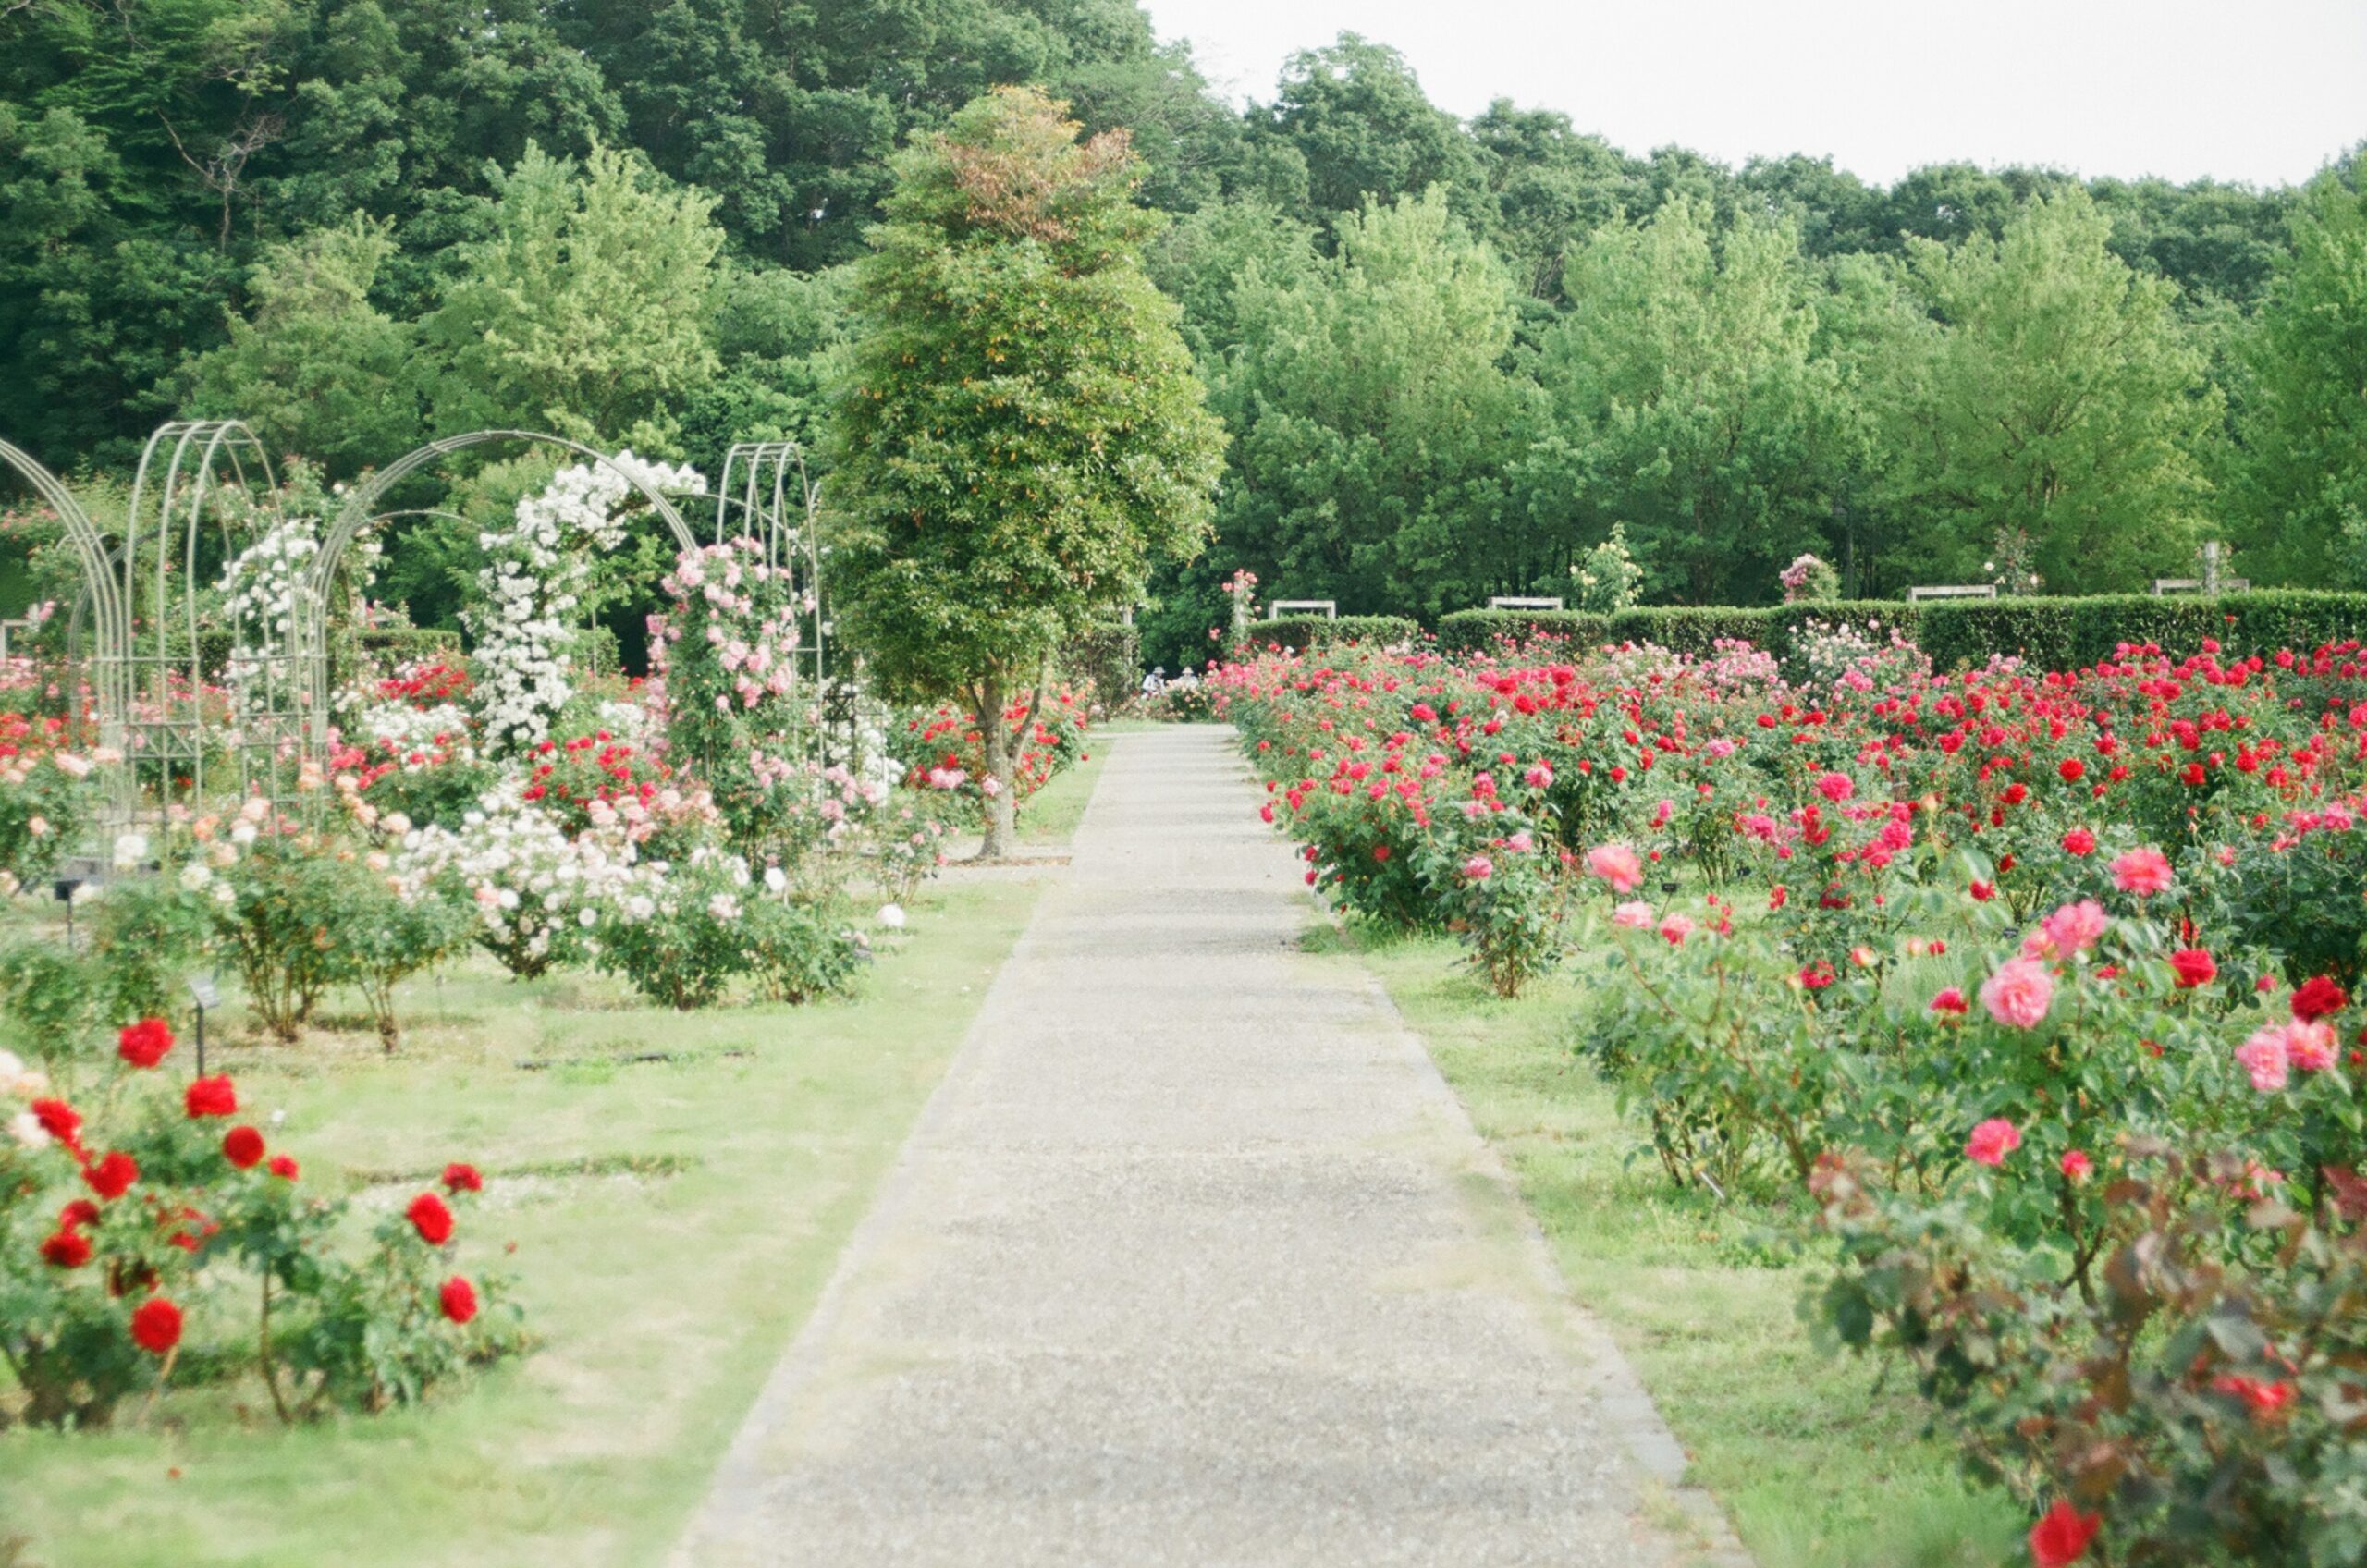 A lush, public rose garden with trellises in the summer.